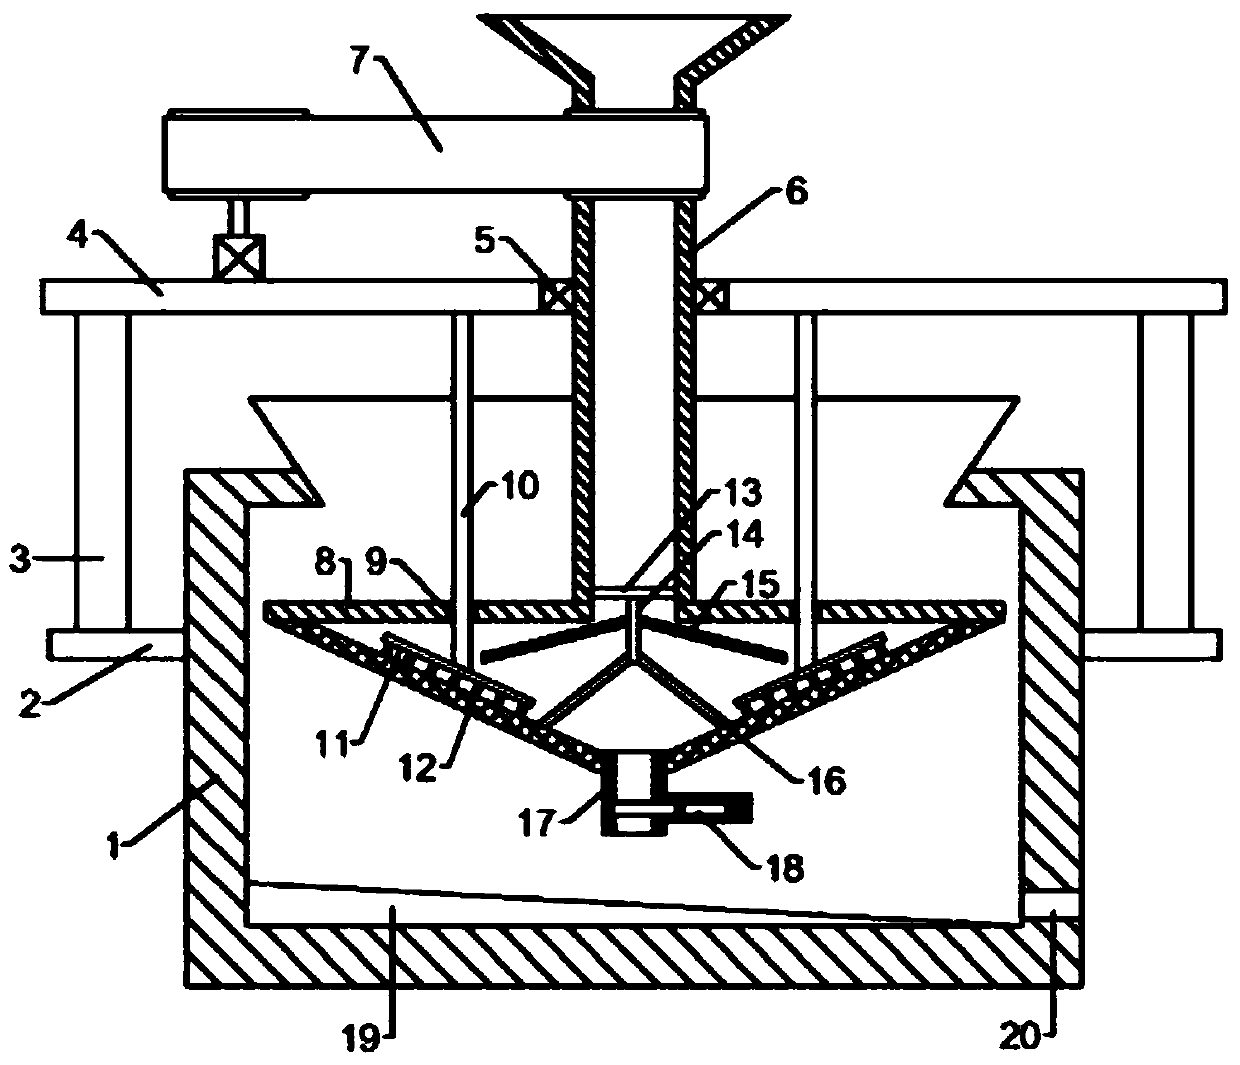 Screening equipment for rubber processing based on centrifugal force principle